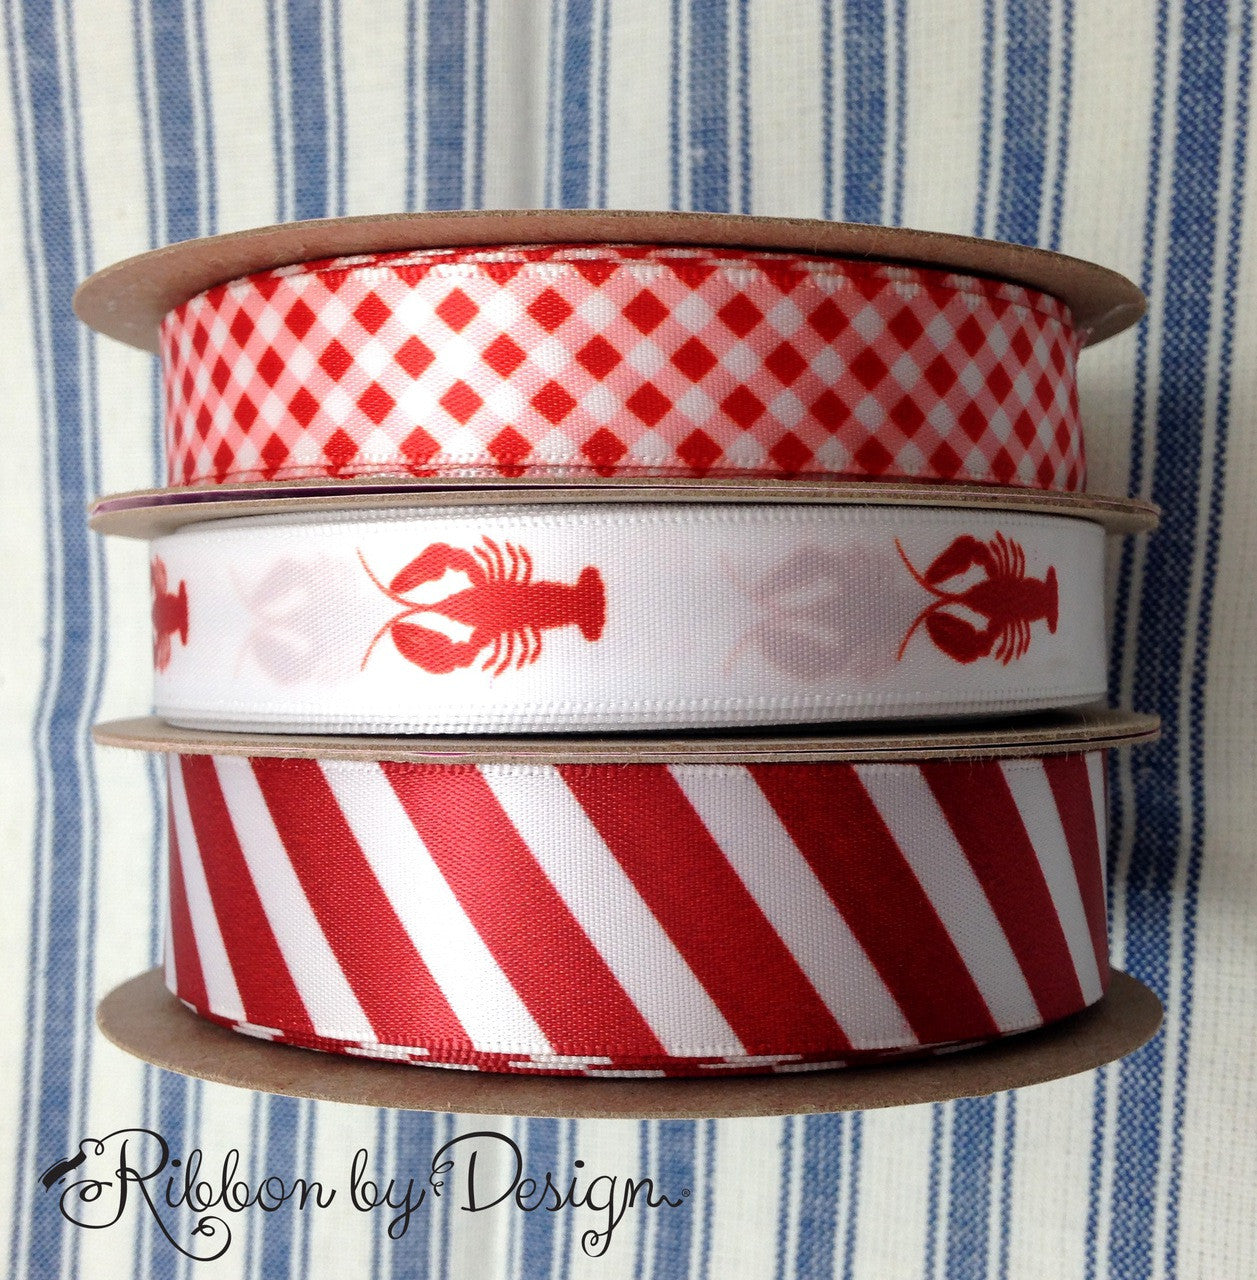 Gingham Check Ribbon in red and white on 7/8 White grosgrain